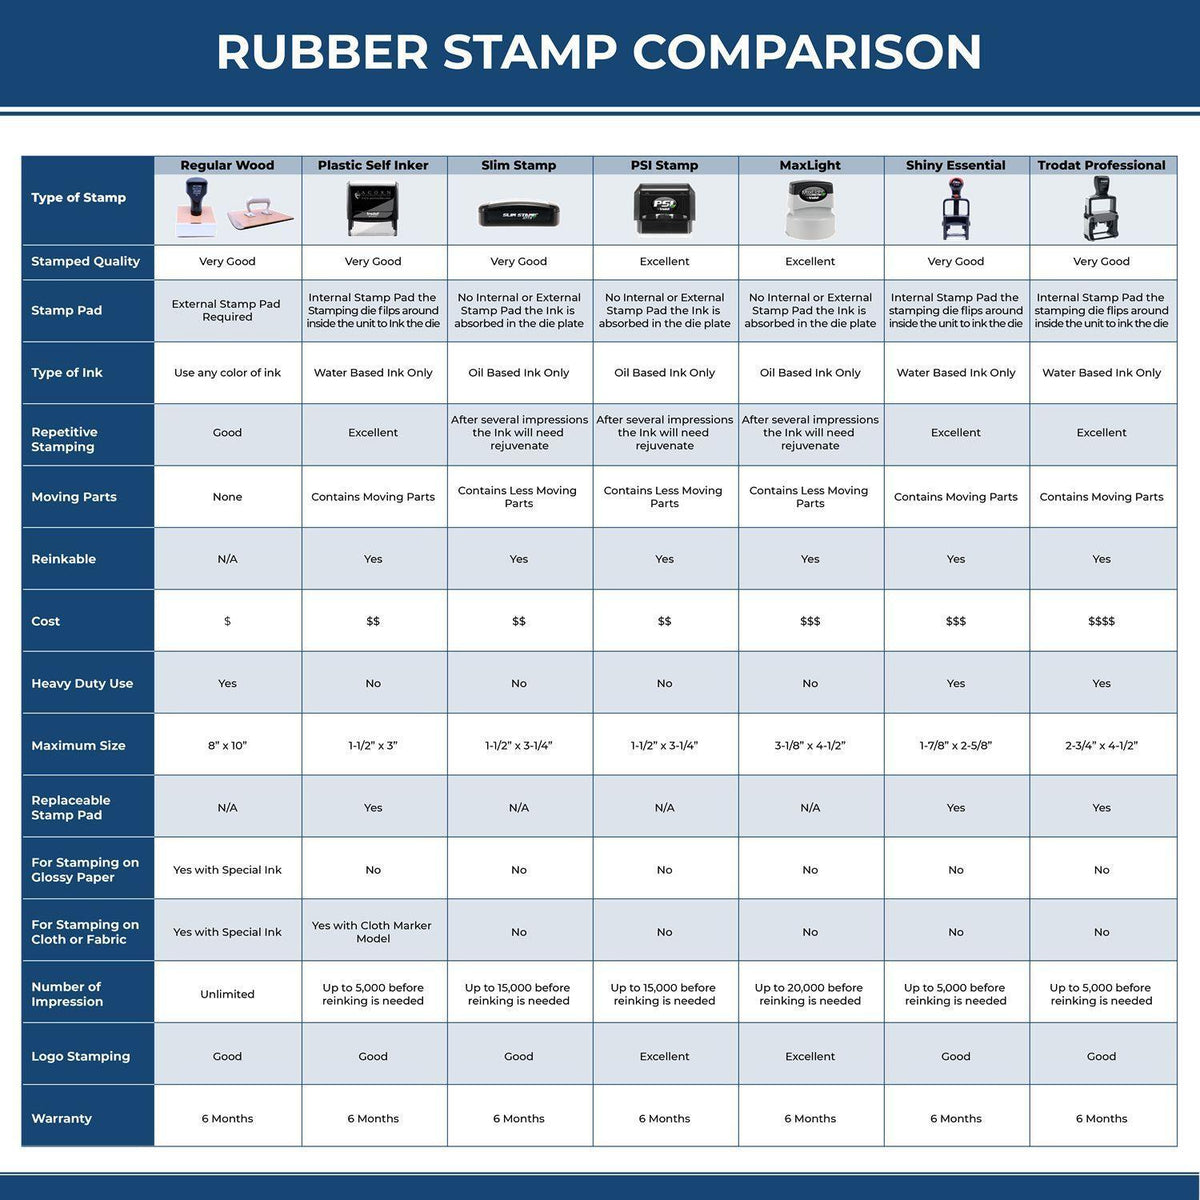 Large Need To Improve Listening Rubber Stamp 4684R Rubber Stamp Comparison